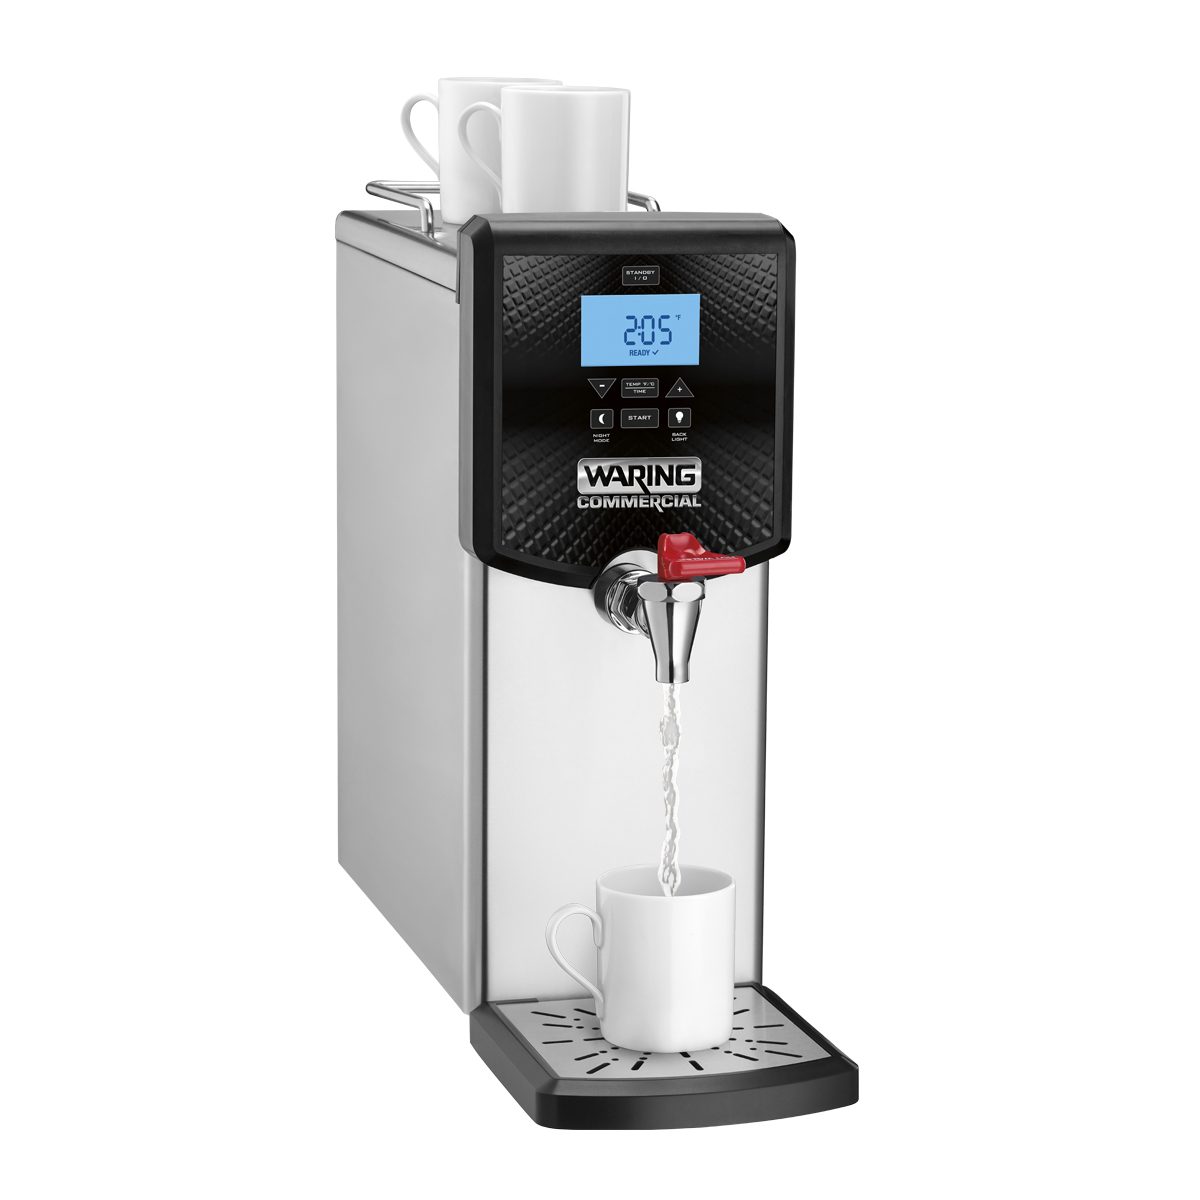 coffee pot with hot water dispenser